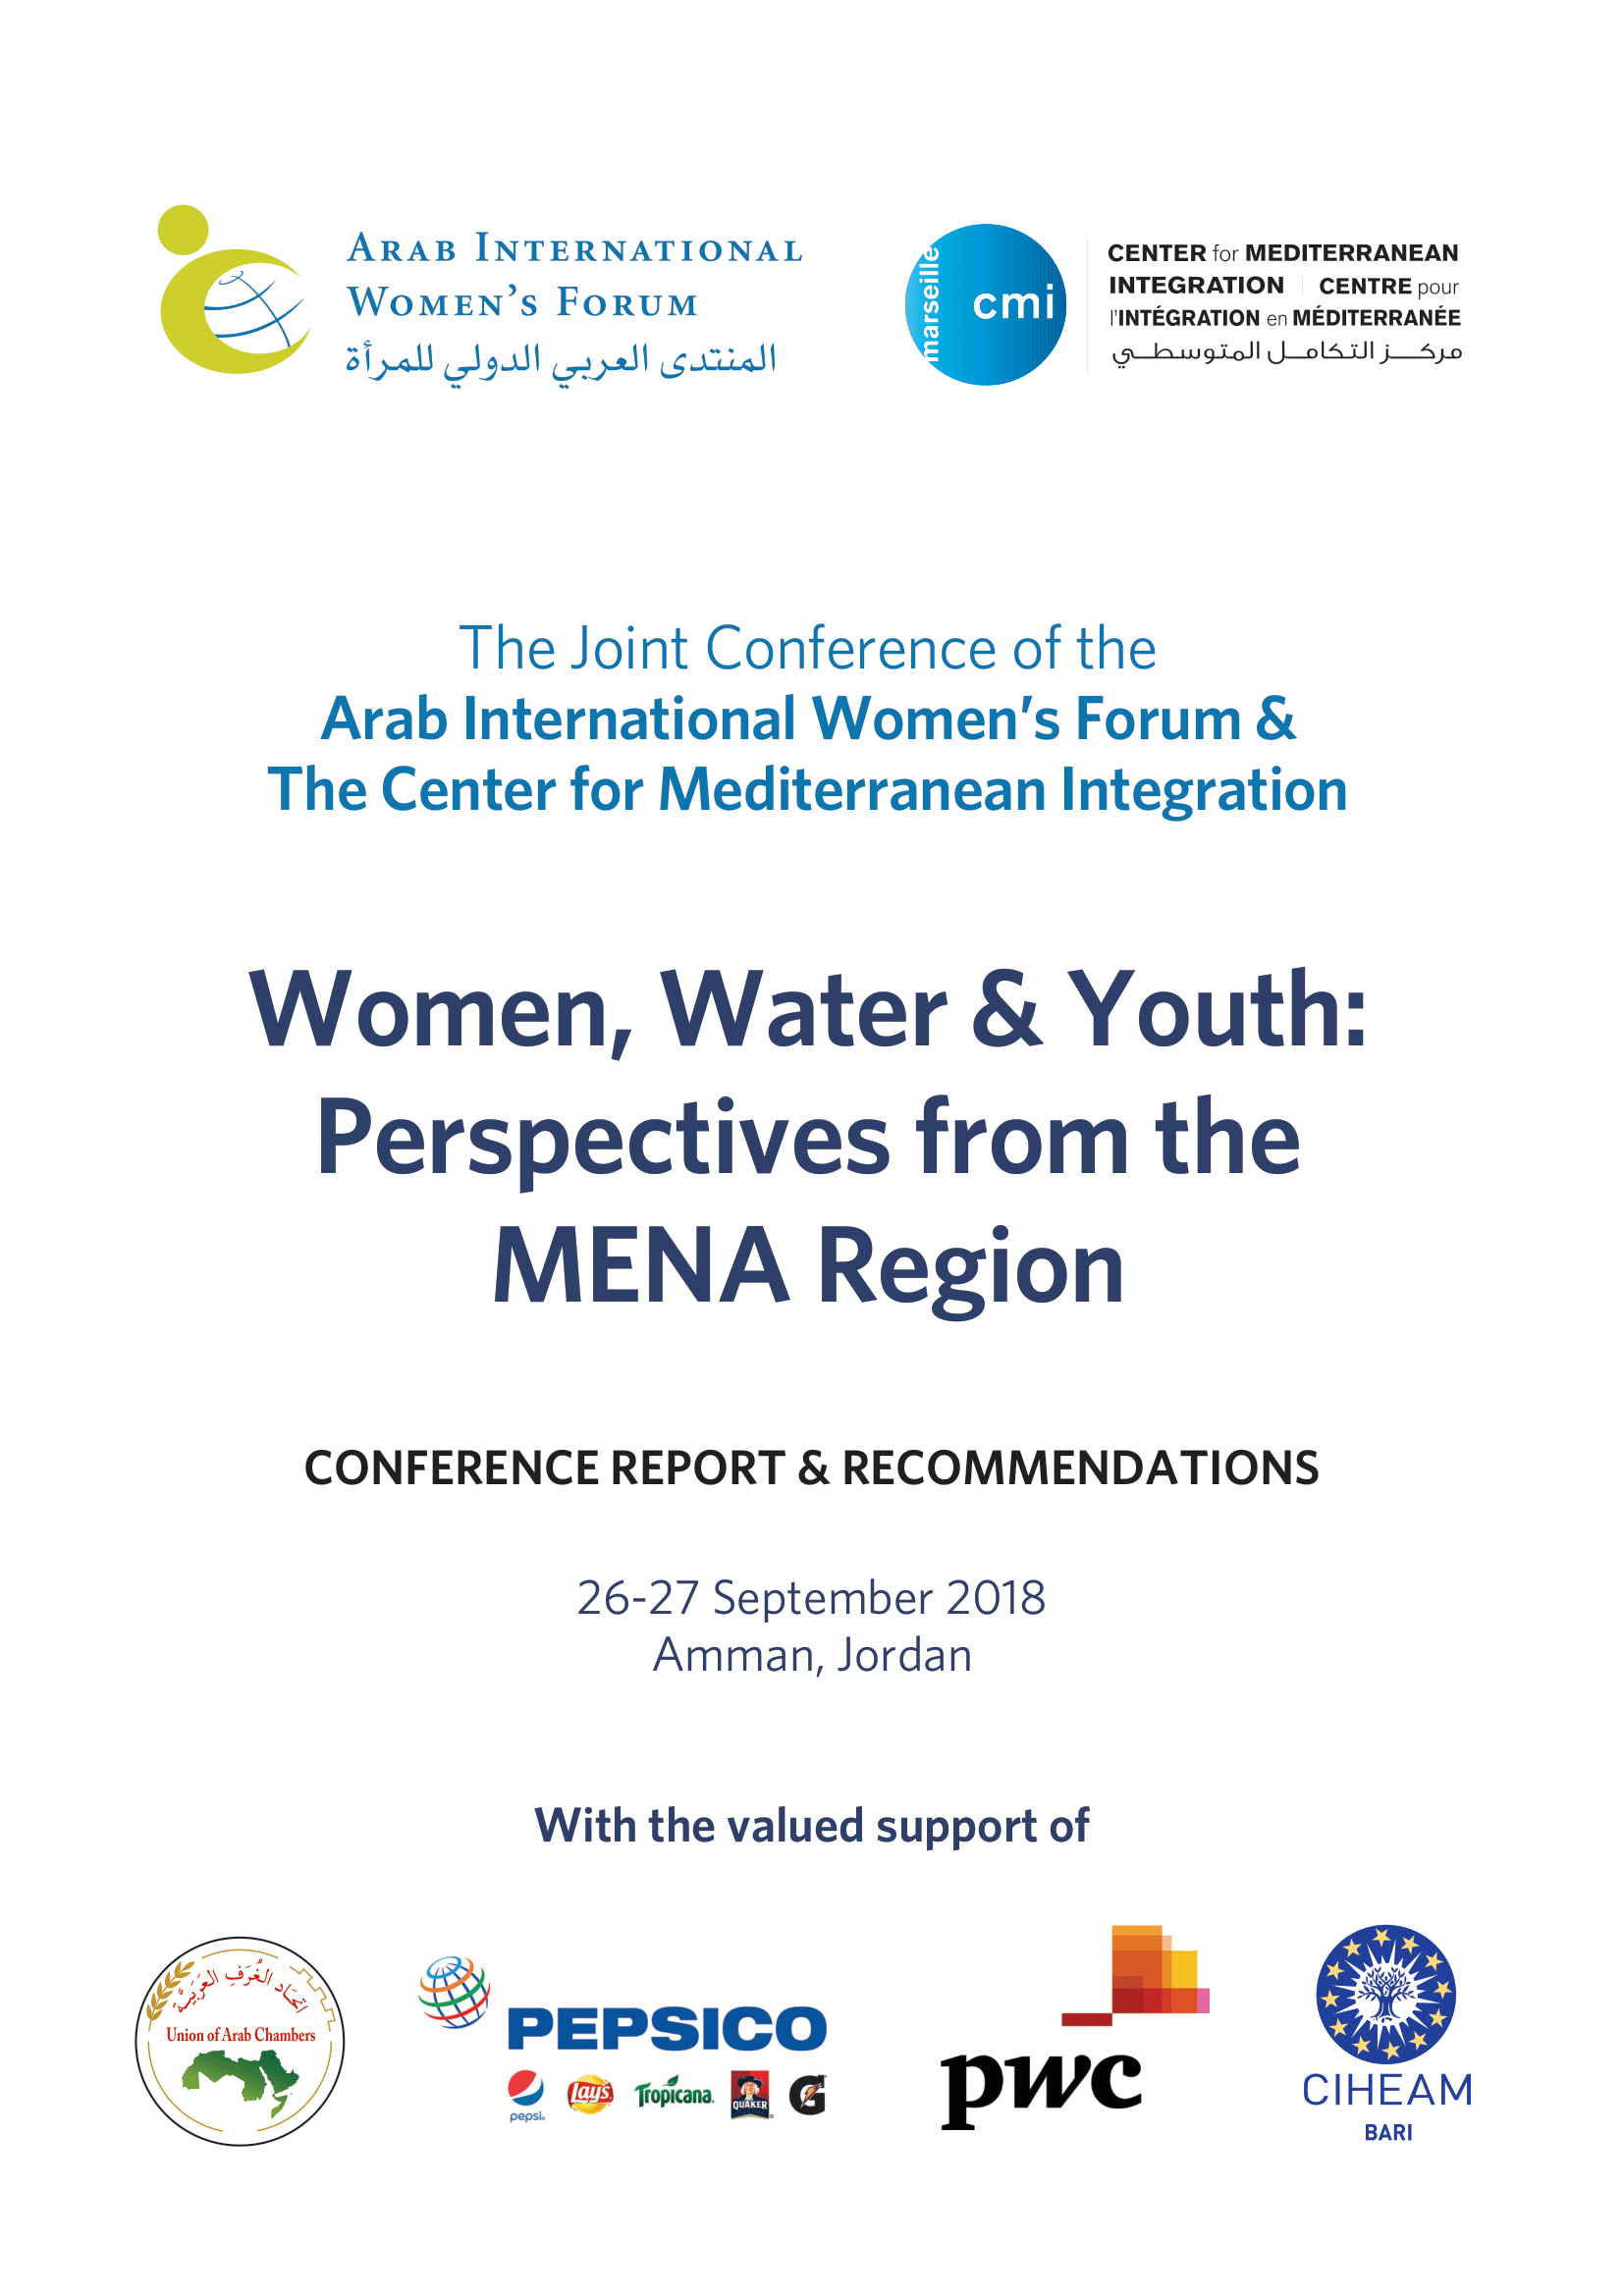 Women, Water & Youth Special Report & Recommendations (Amman, September 2018)